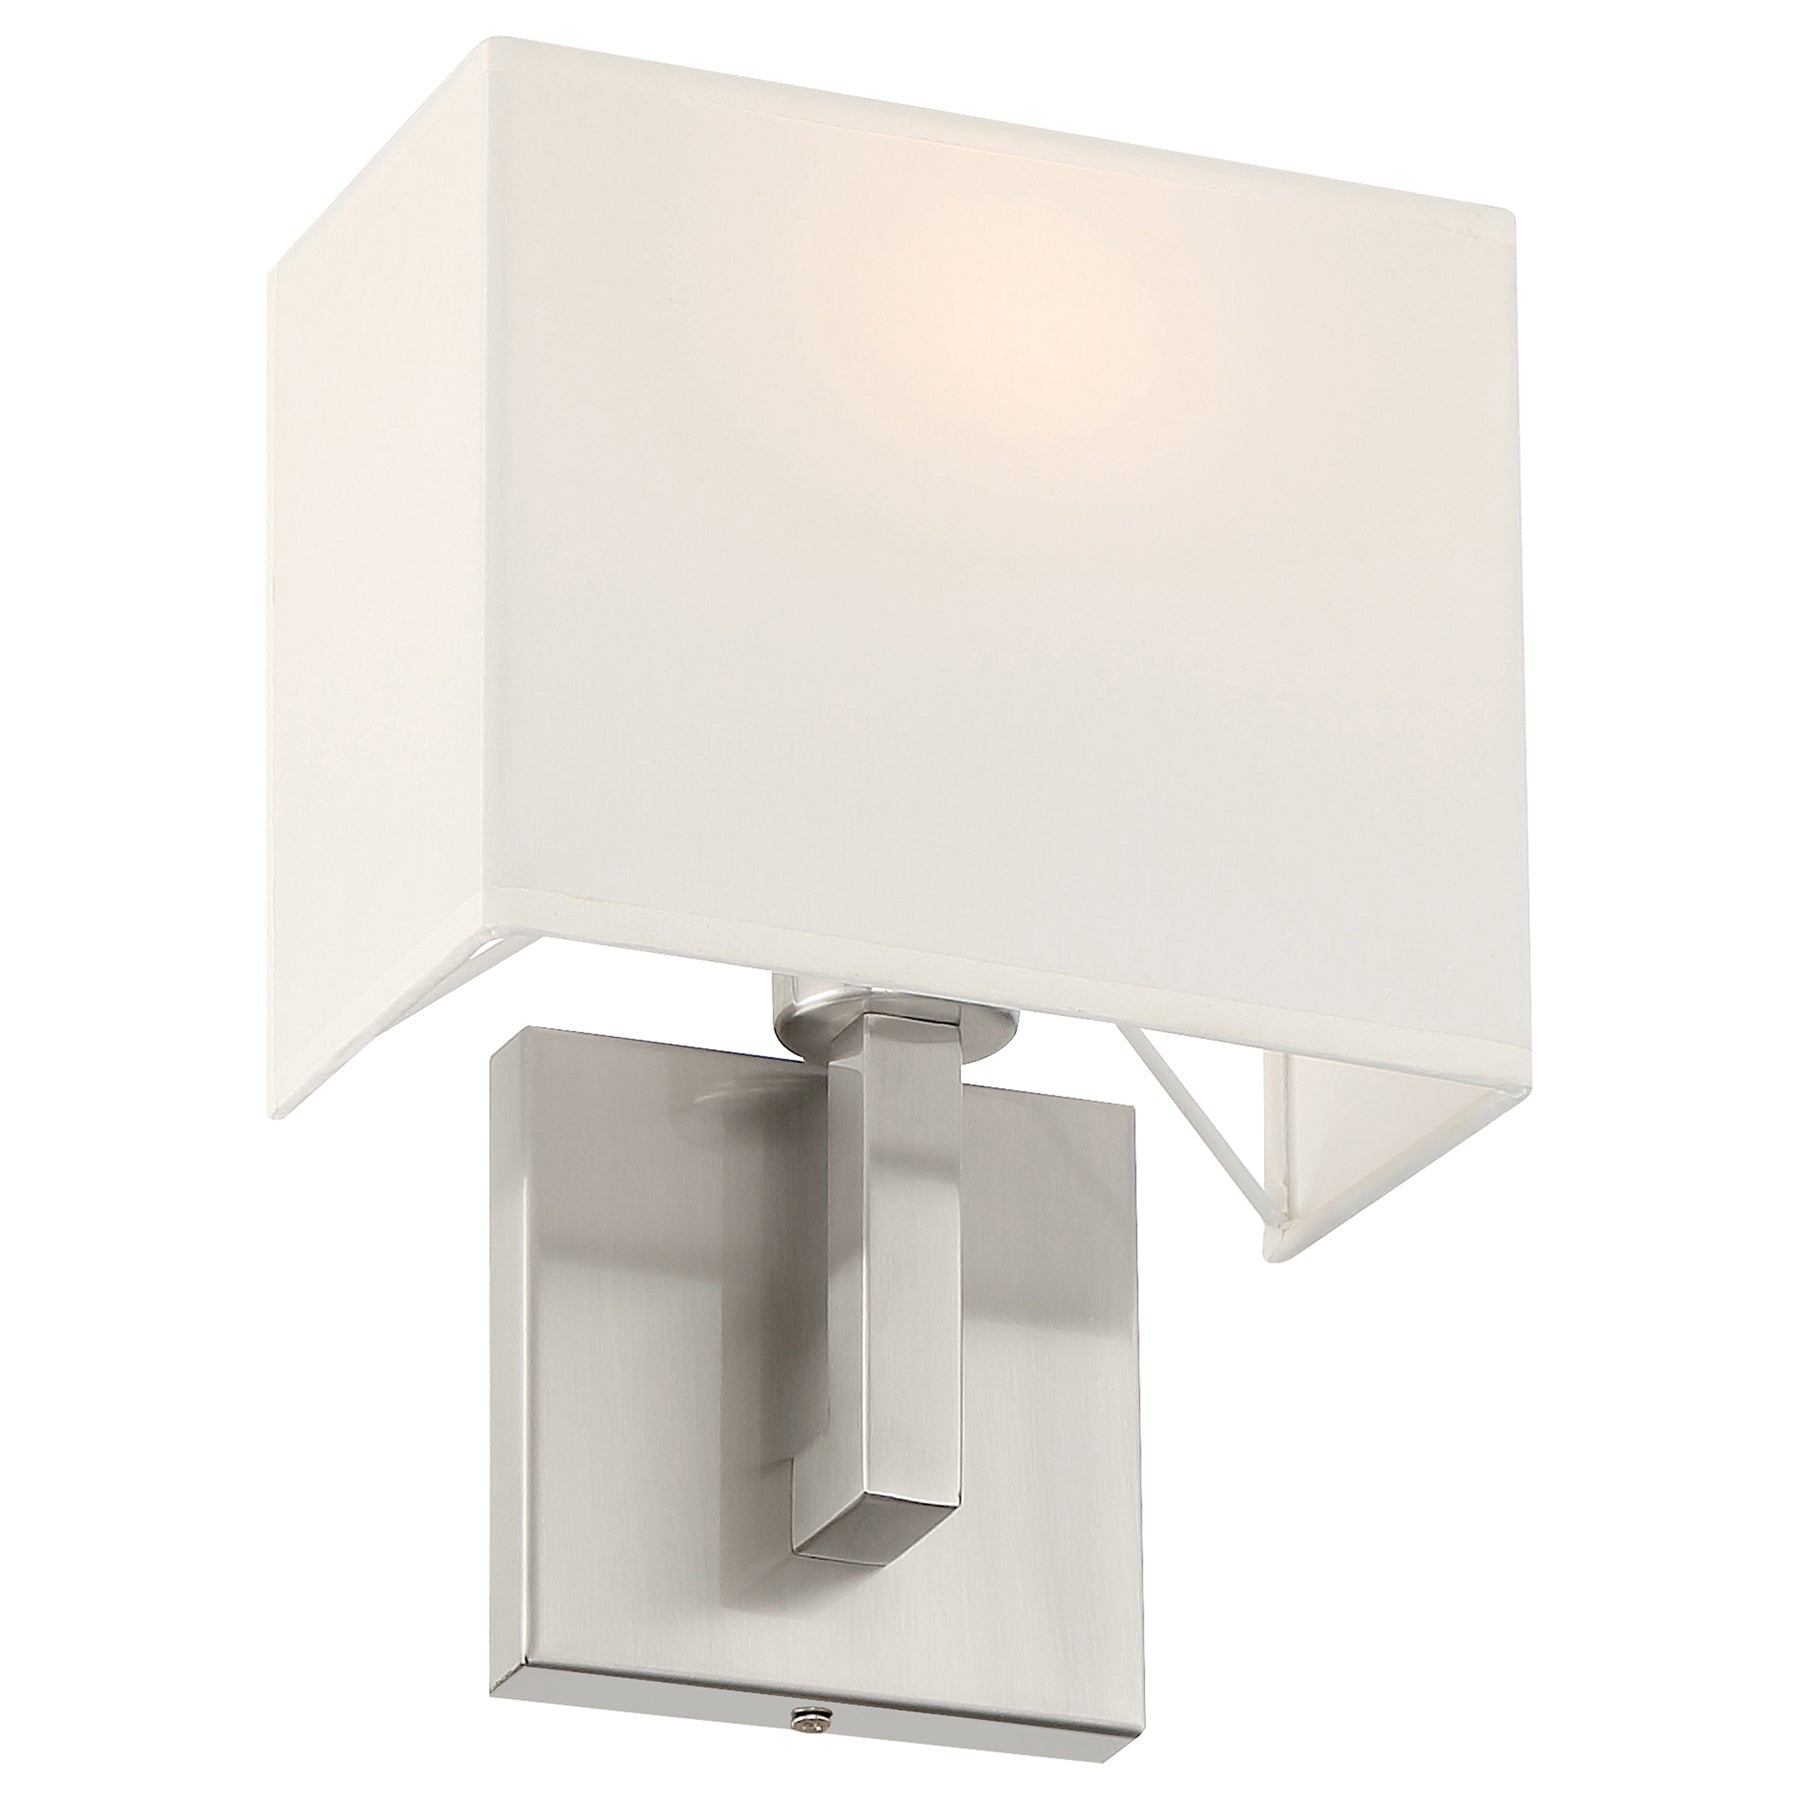 Mid Town 10.75in. LED Wall Light Fixture (Brushed Steel)